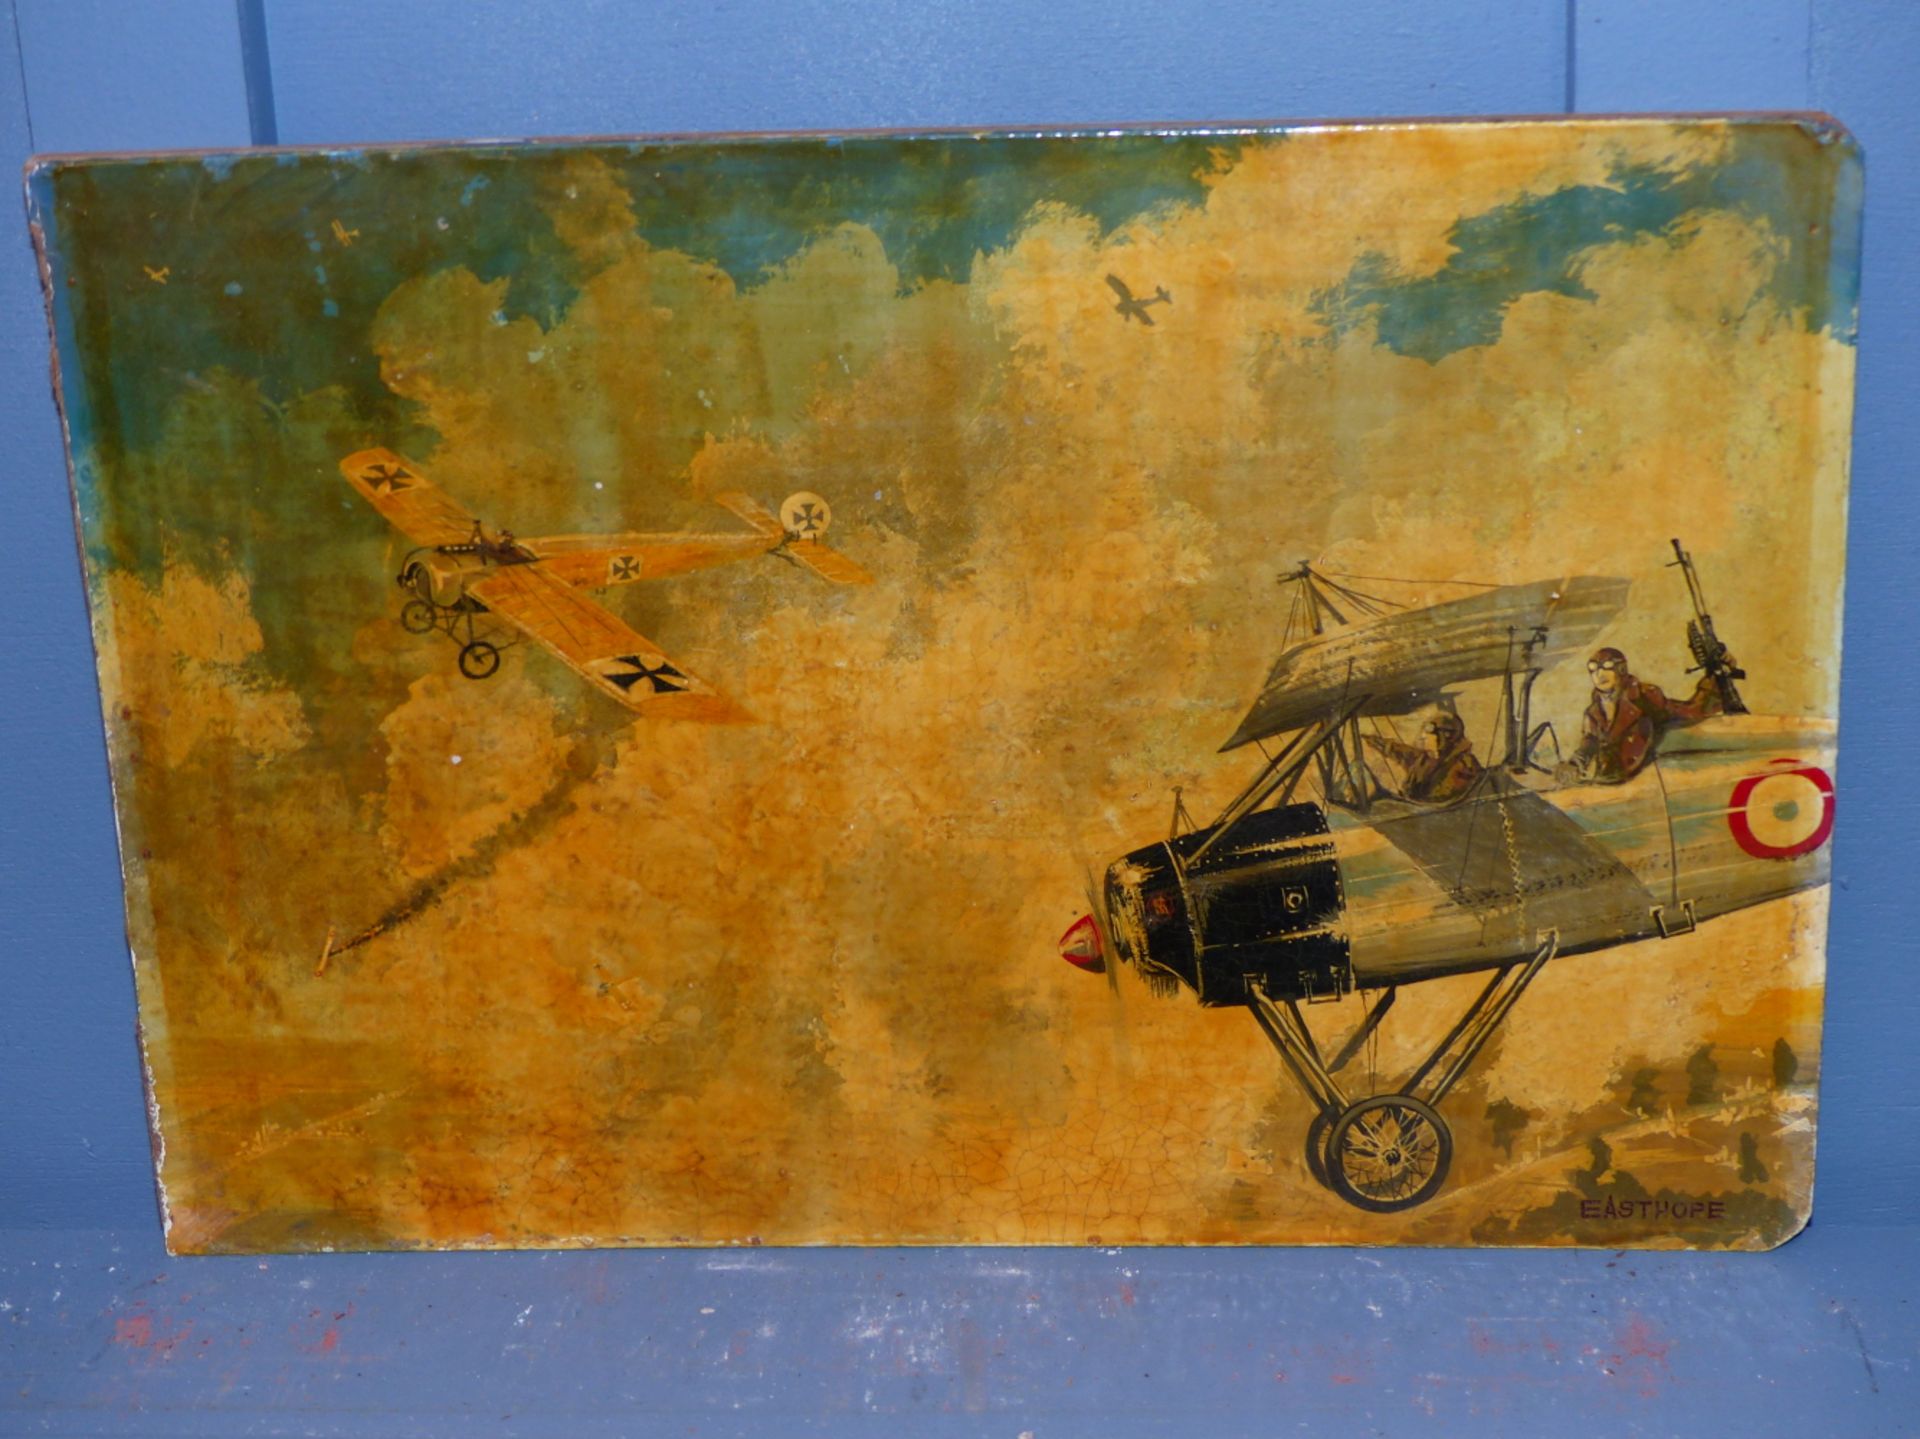 JOHN EASTHOPE (20TH CENTURY), A FIRST WORLD WAR DOGFIGHT WITH A  GERMAN PLANE, SIGNED, OIL ON BOARD, - Image 2 of 3